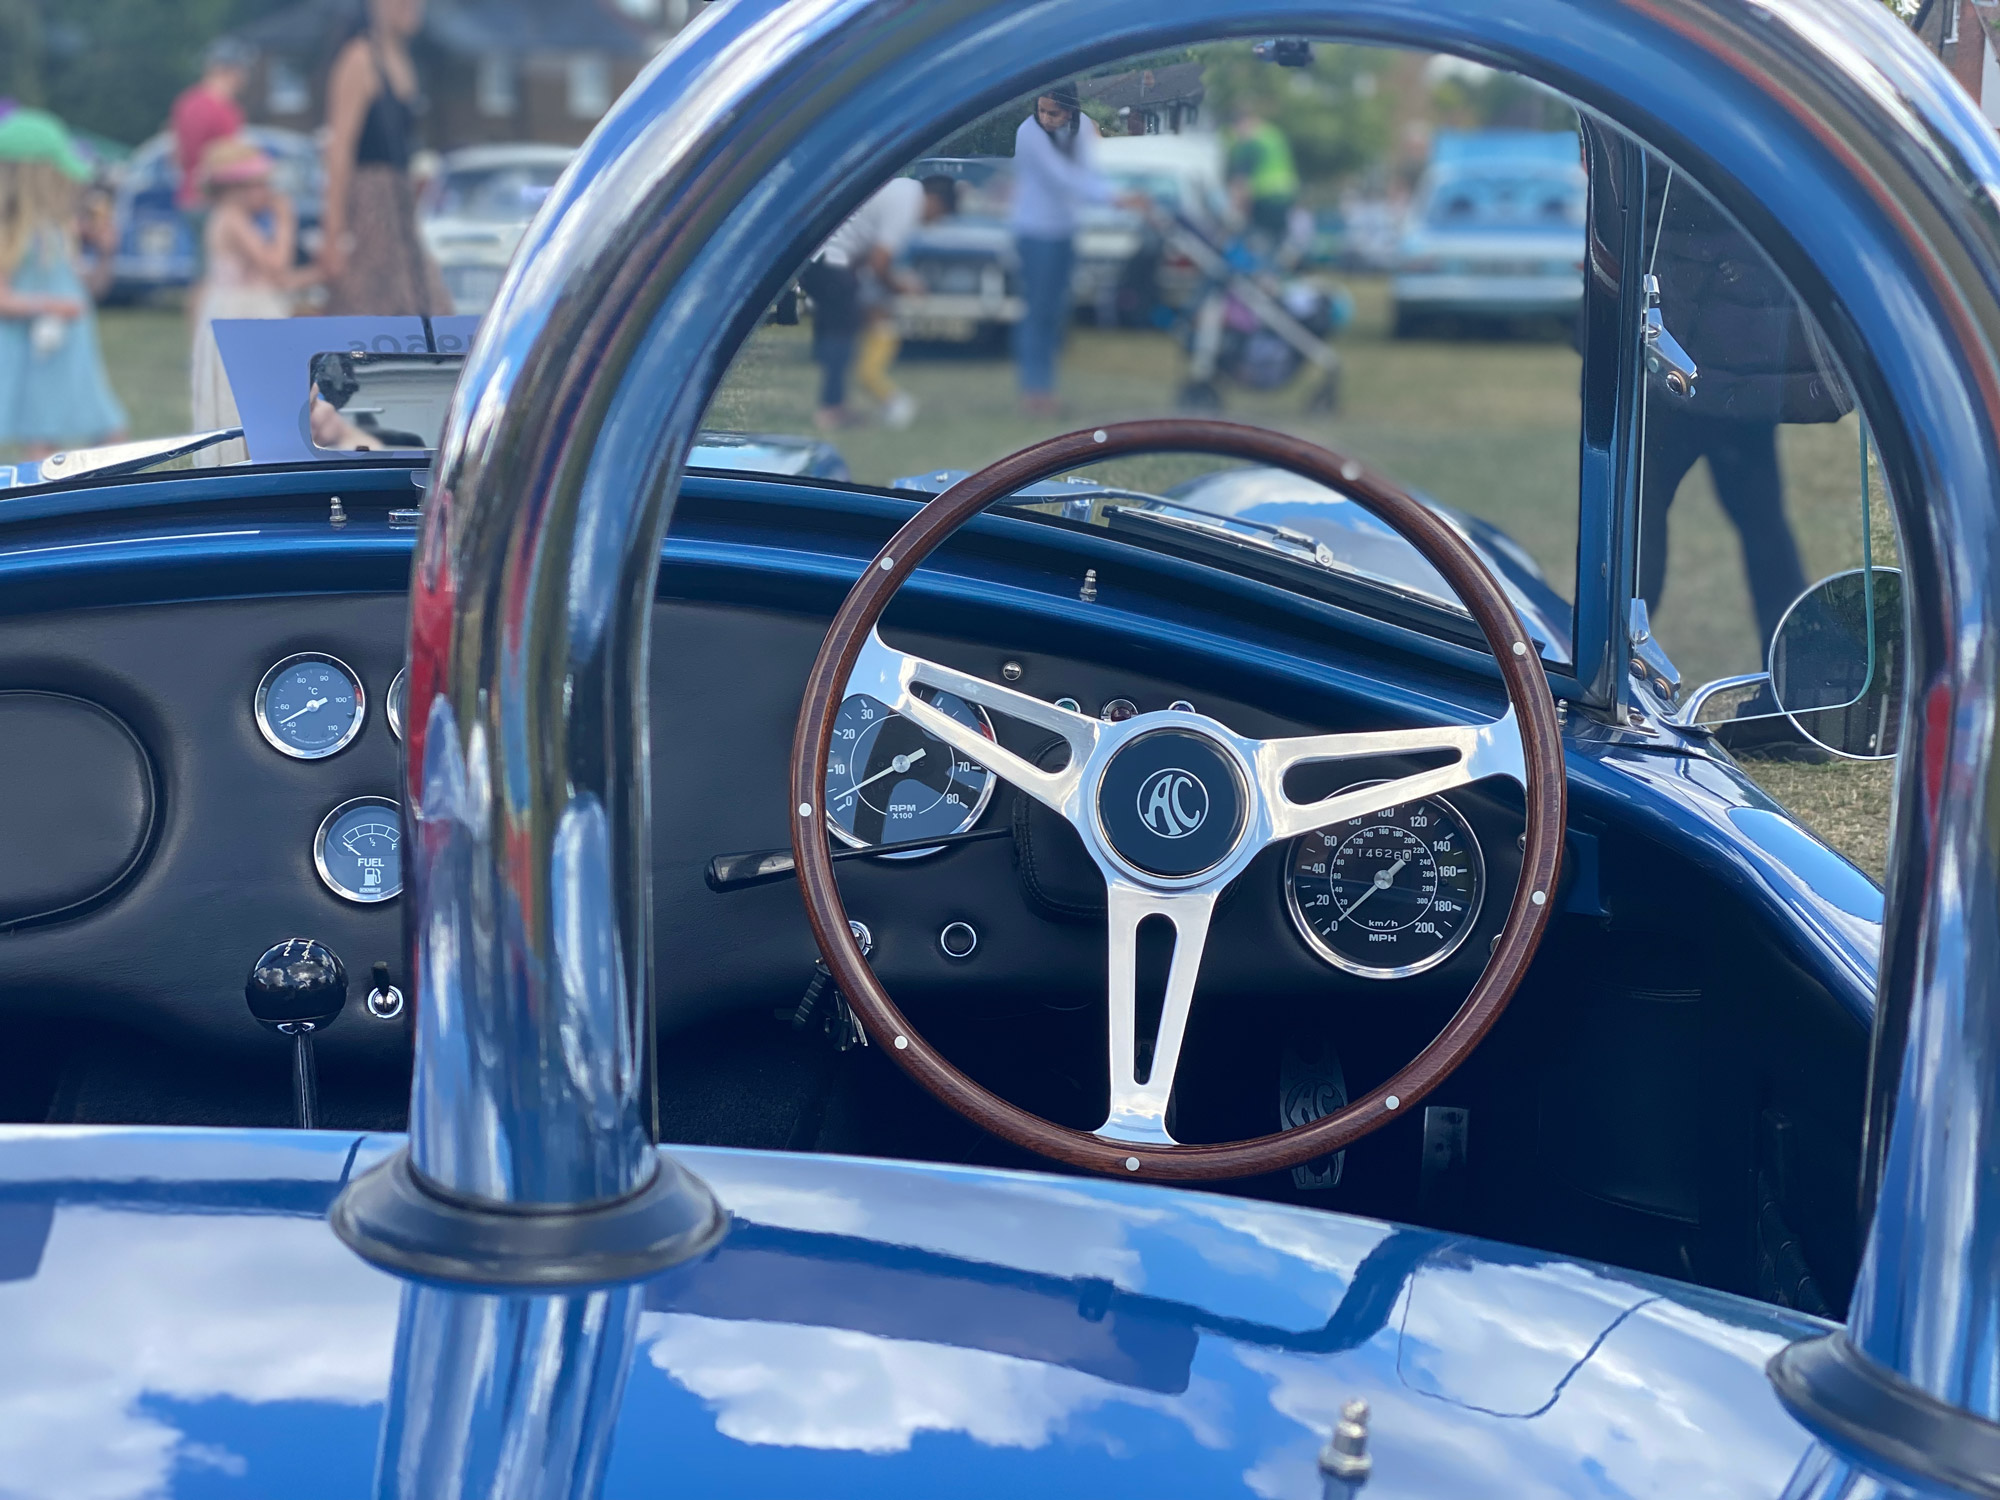 AC Shelby 427 Cobra 1968 steering wheel, roll bar and cockpit.